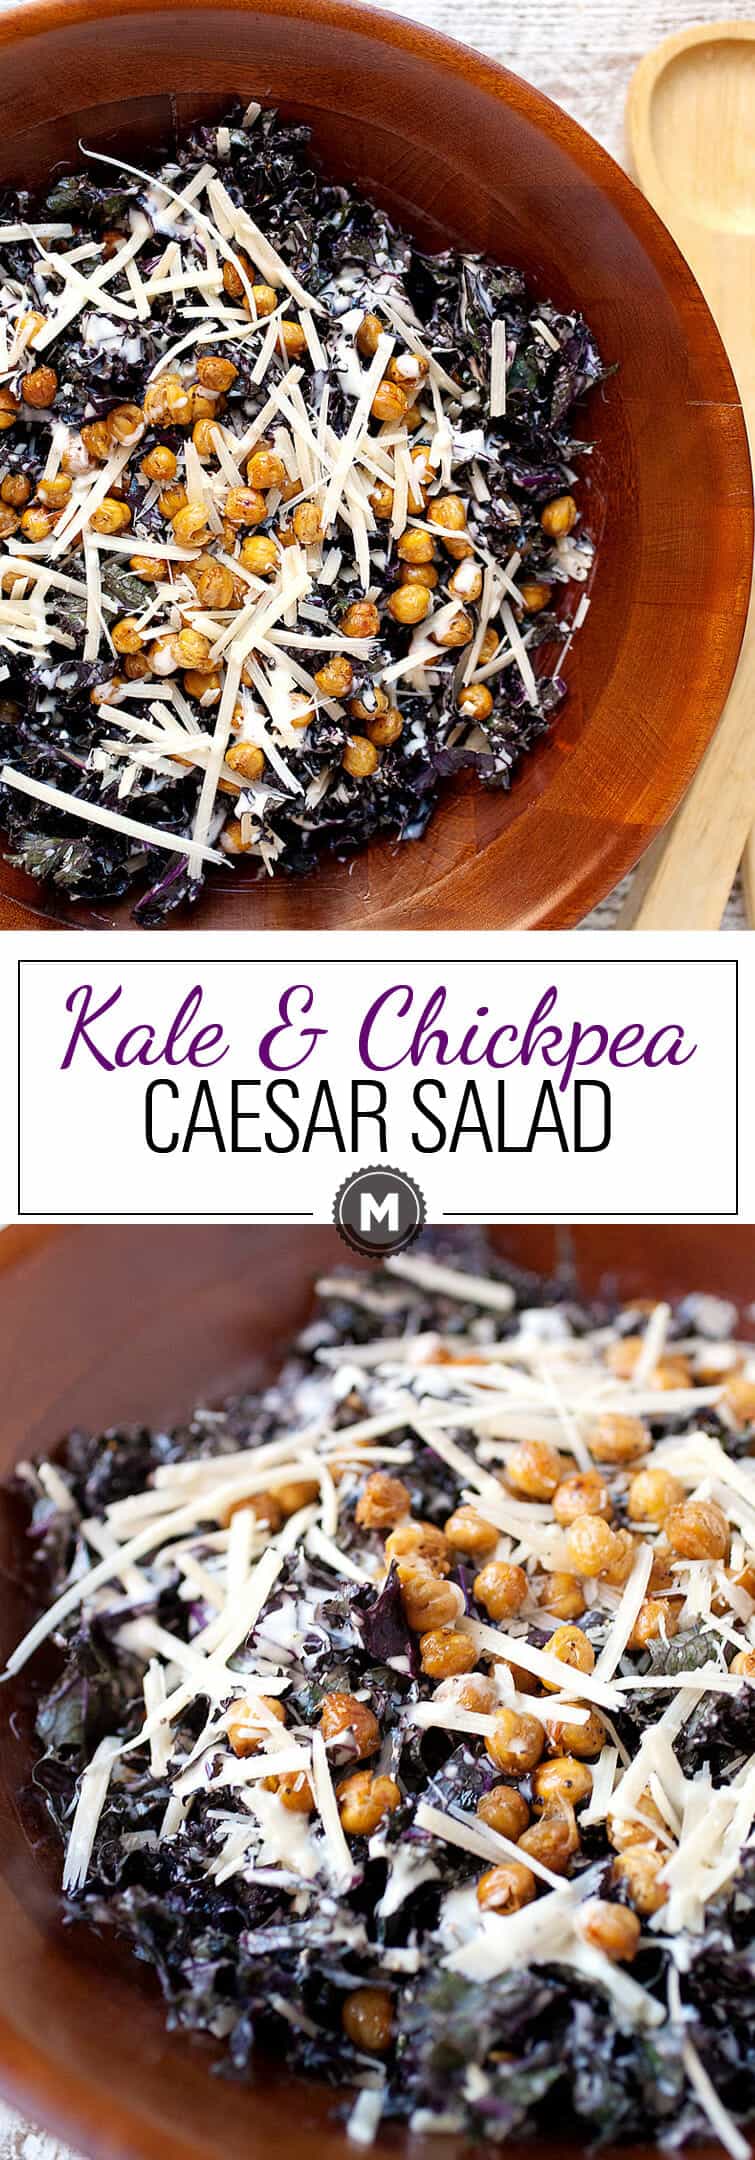 Kale Chickpea Caesar Salad: This salad is all about simple and tasty veggies. Purple kale lightly tossed in a homemade caesar salad dressing (no anchovies in this version). Roasted, crispy chickpeas take the place of croutons! I love this salad in the winter! | macheesmo.com